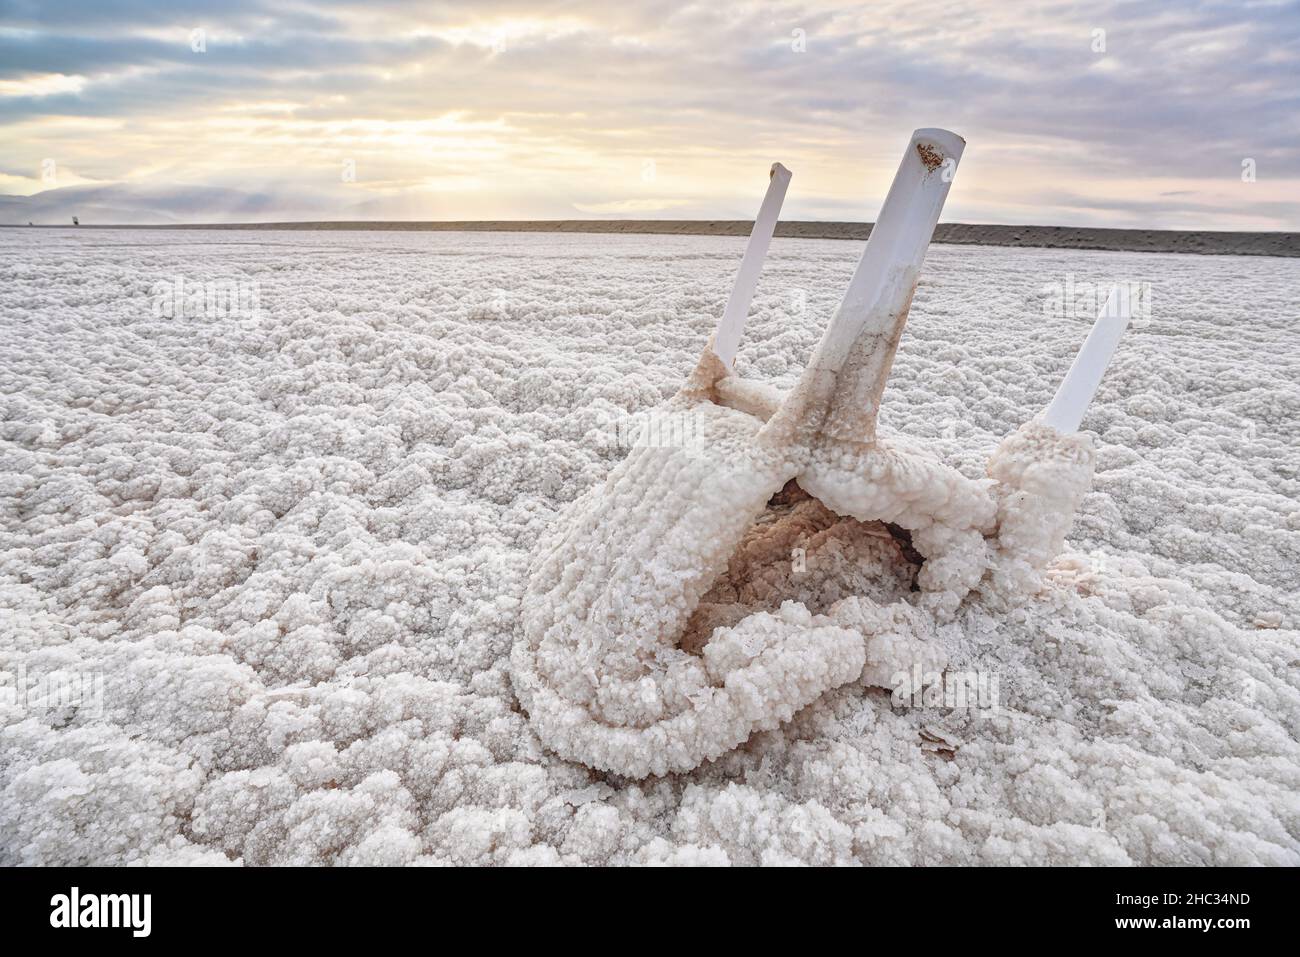 Small plastic chair completely covered with crystalline salt on shore of dead sea, closeup detail Stock Photo